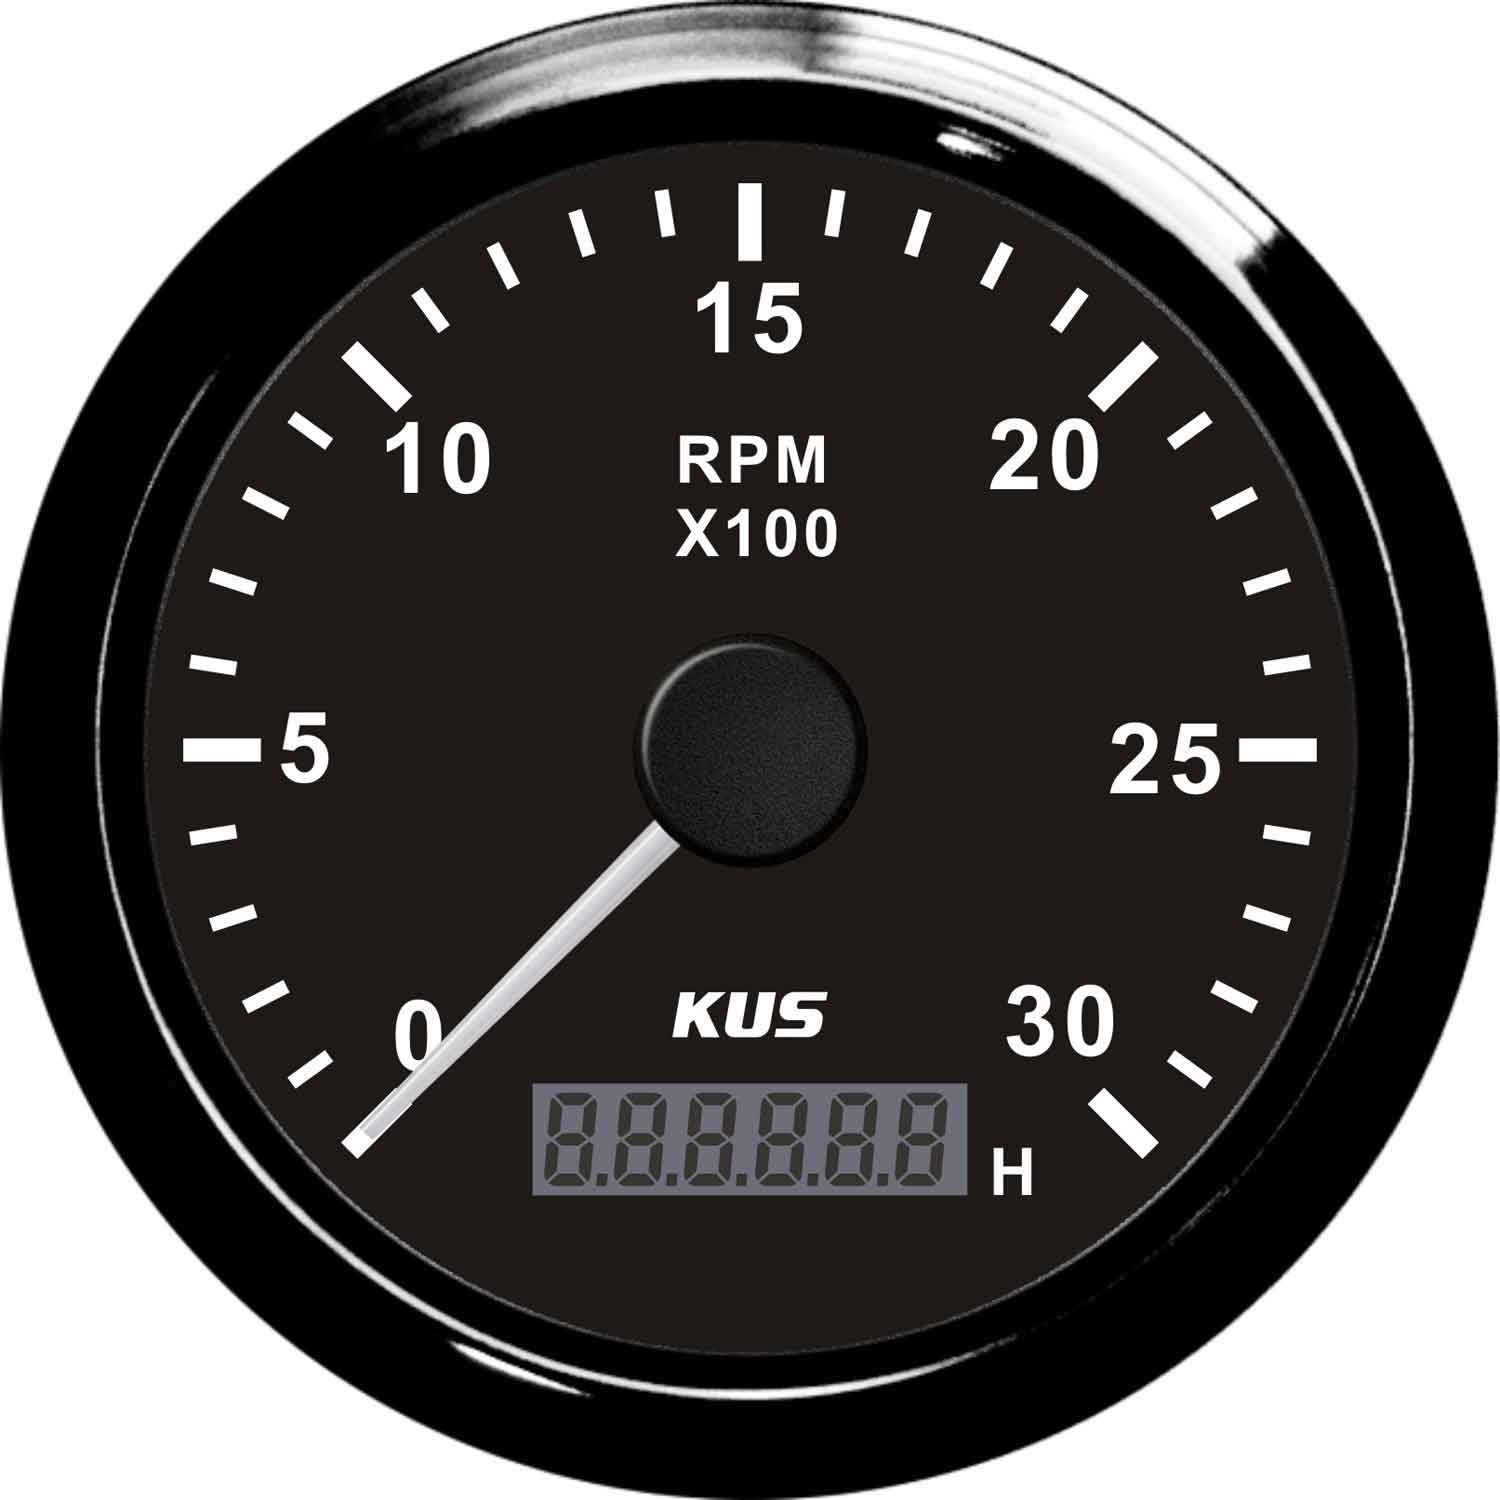 KUS Waterproof Tachometer REV Counter RPM Gauge with Hour Meter 3000RPM 85mm 12V/24V with Backlight 